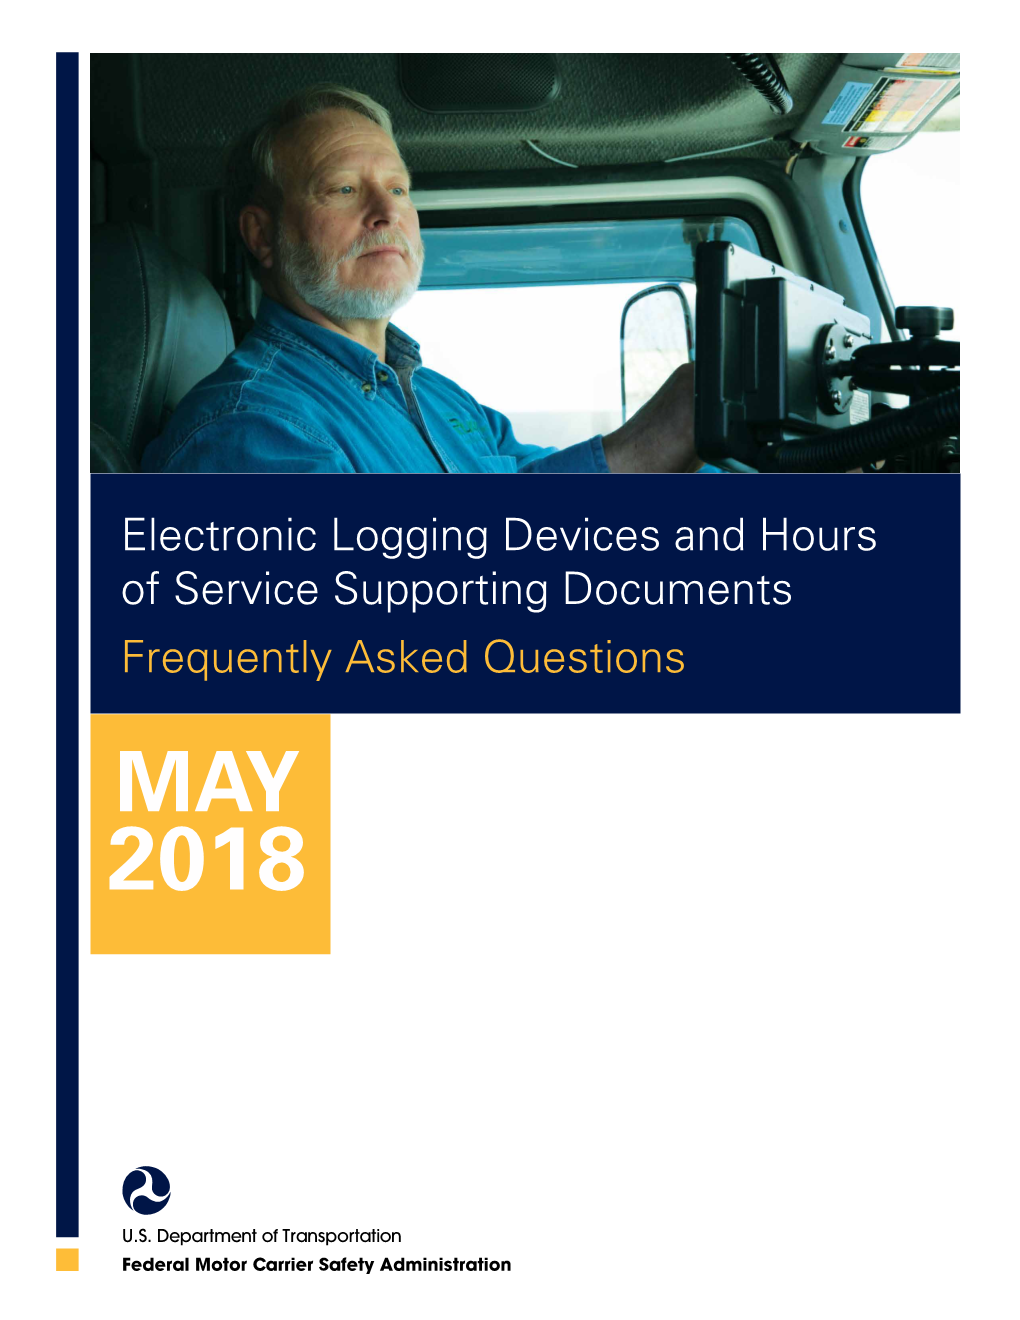 Electronic Logging Devices and Hours of Service Supporting Documents Frequently Asked Questions MAY 2018 Table of Contents